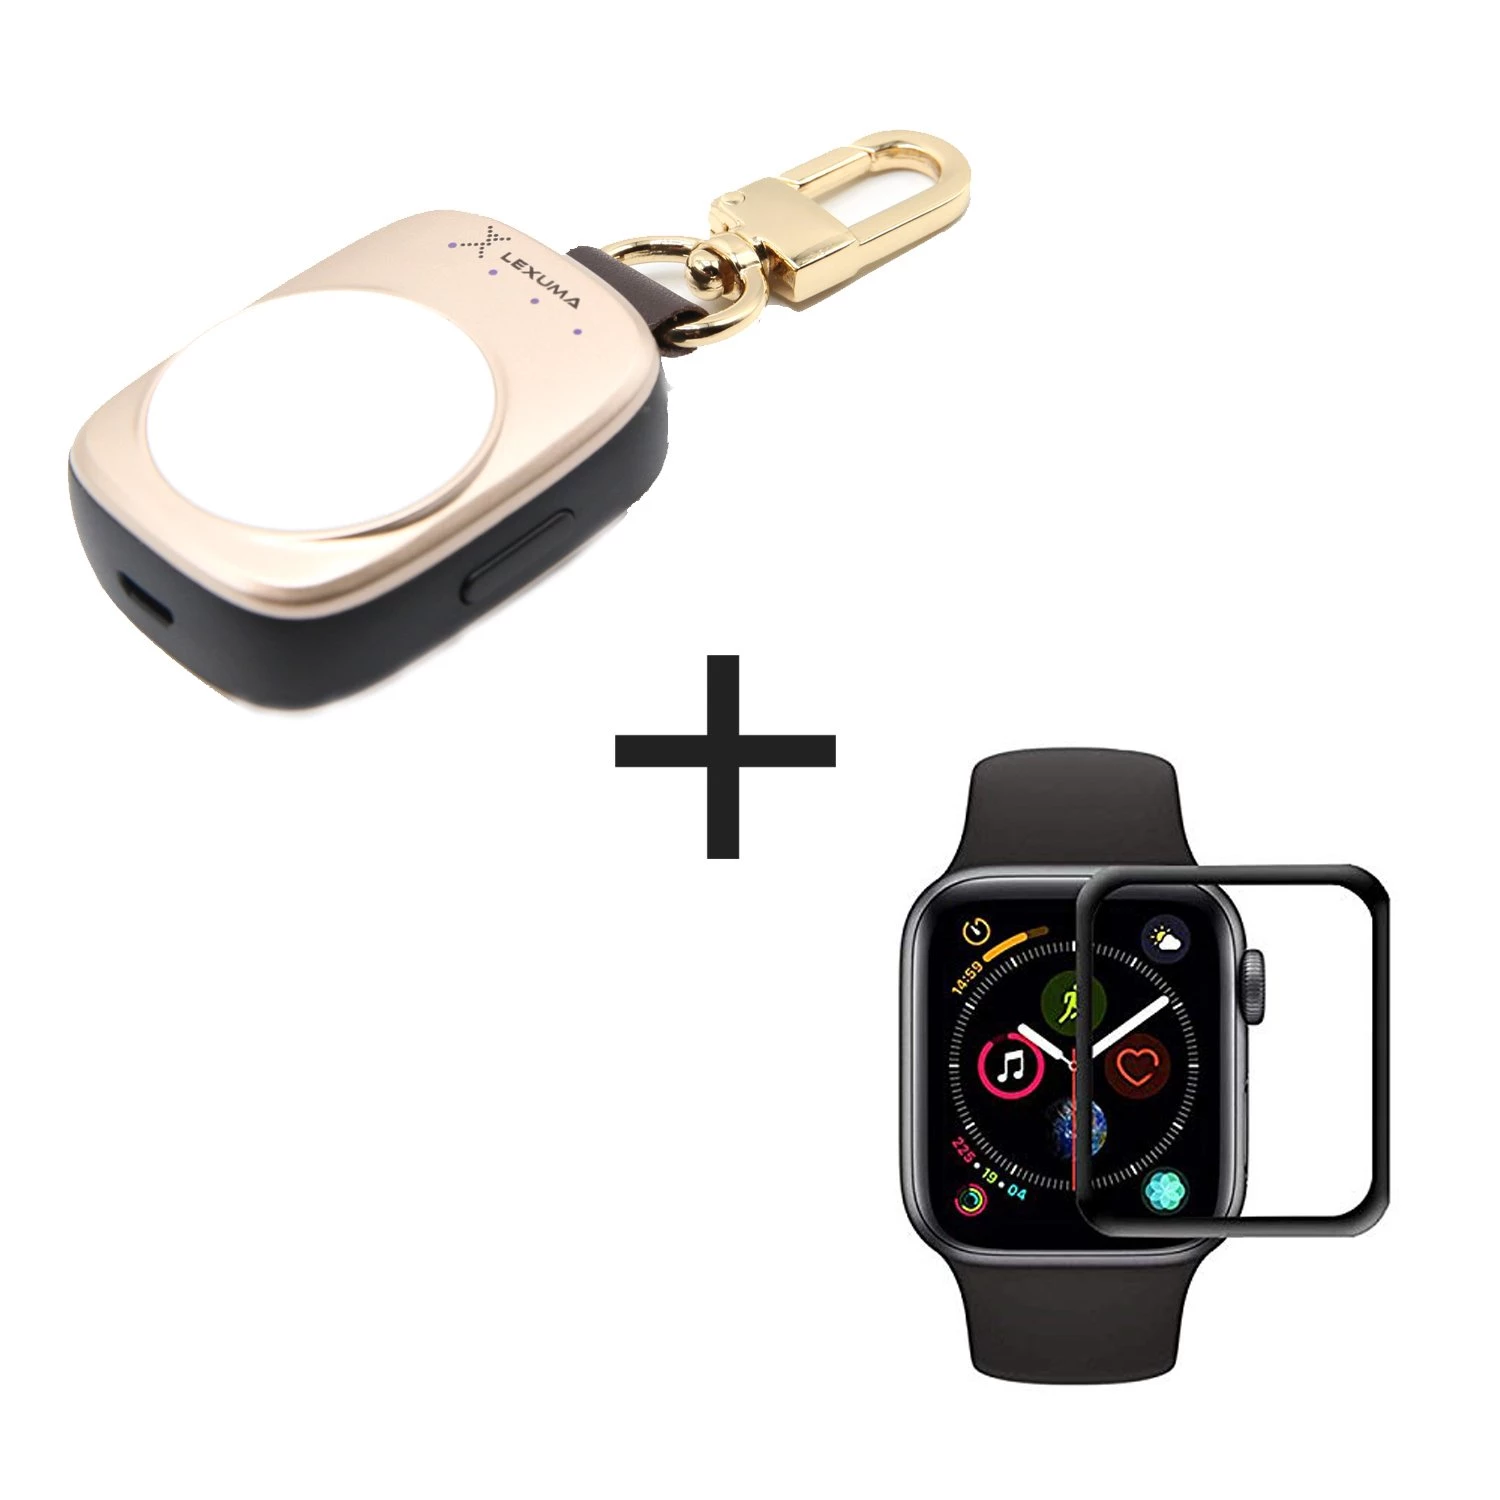 Apple Watch Power Bank portable charger and Apple Watch Series 4 and Series 5 3D Tempered Glass Screen Protector Wireless Charging Travel Charger 辣數碼 dimbuyshop Apple watch series 4 screen protector anti scratch anti-fingerprint tempered glass screen protector film present slide